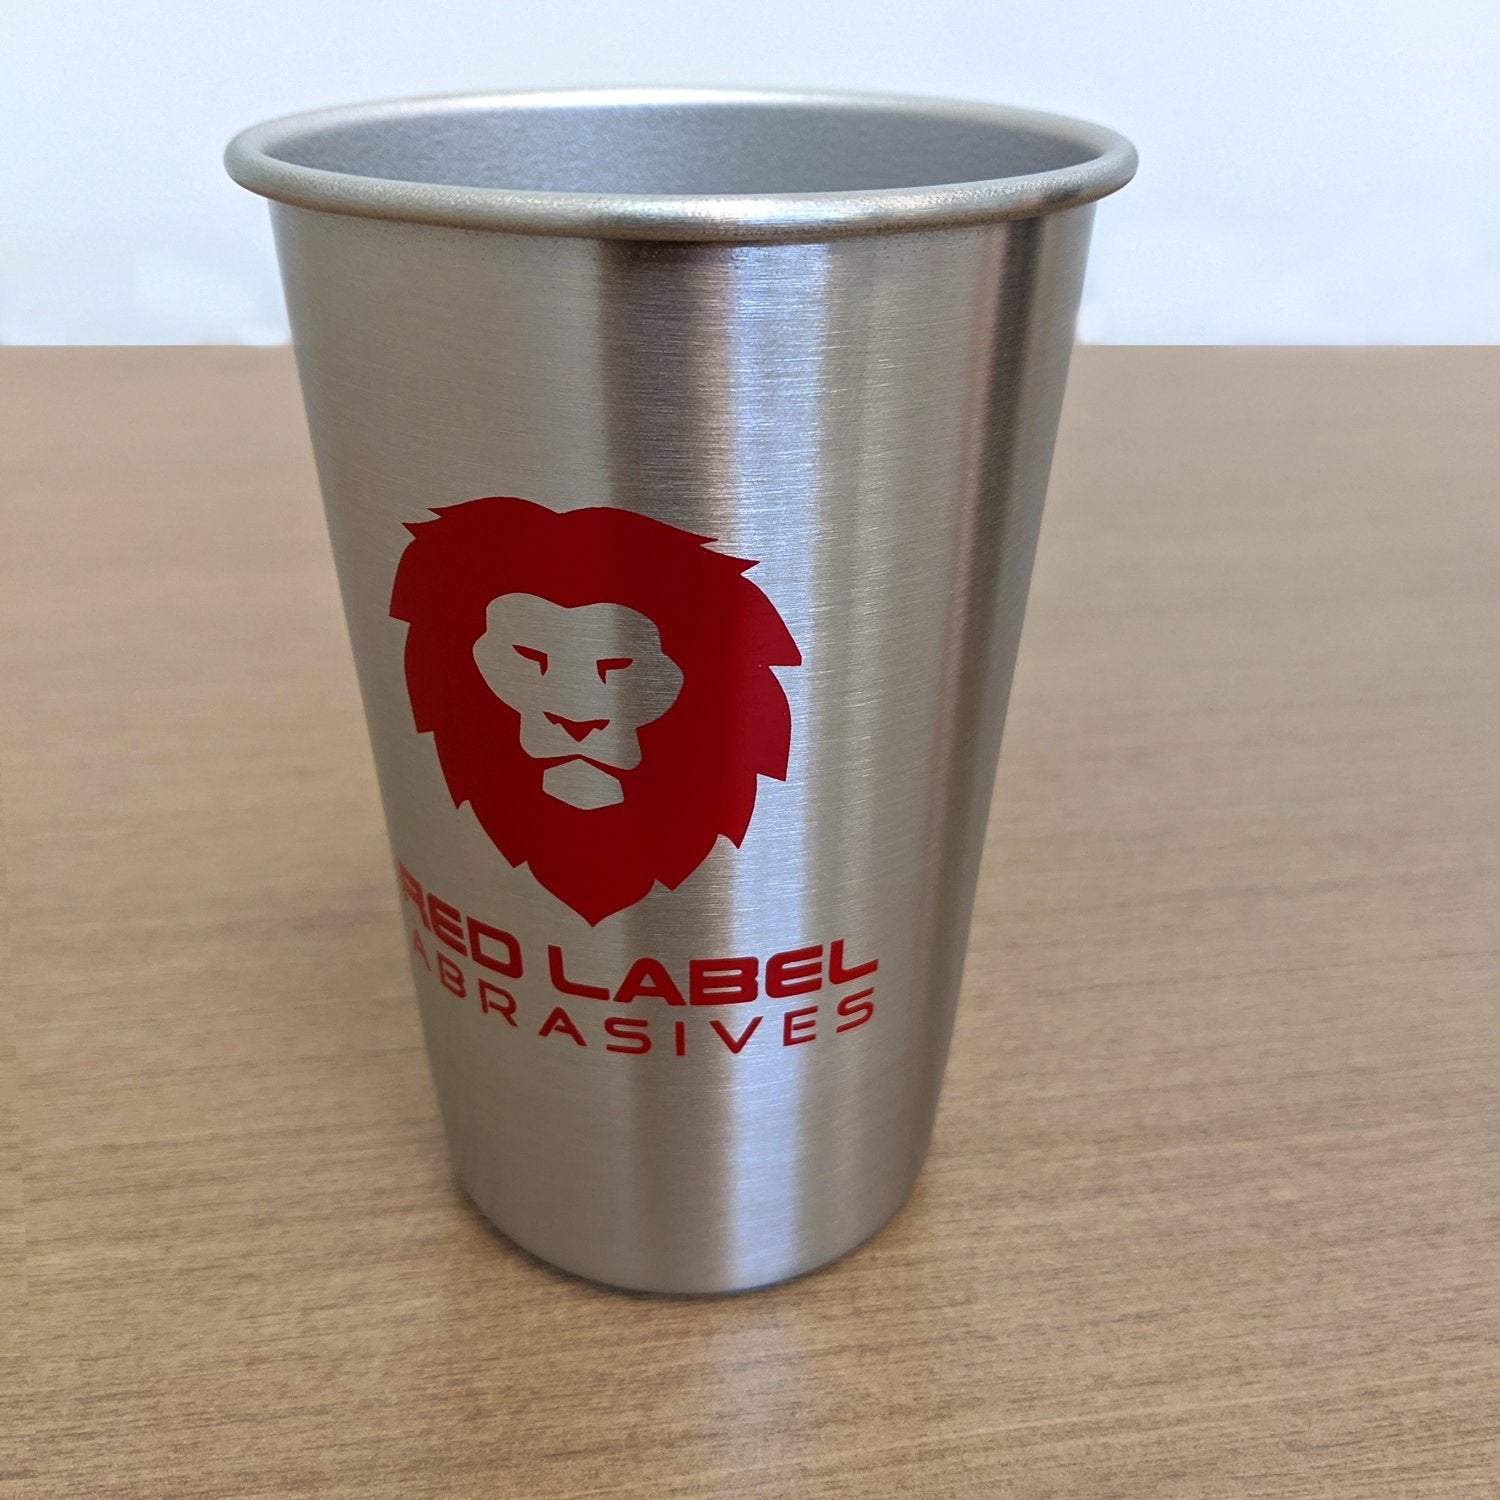 Red Label Abrasives Stainless Steel Cup - Red Label Abrasives